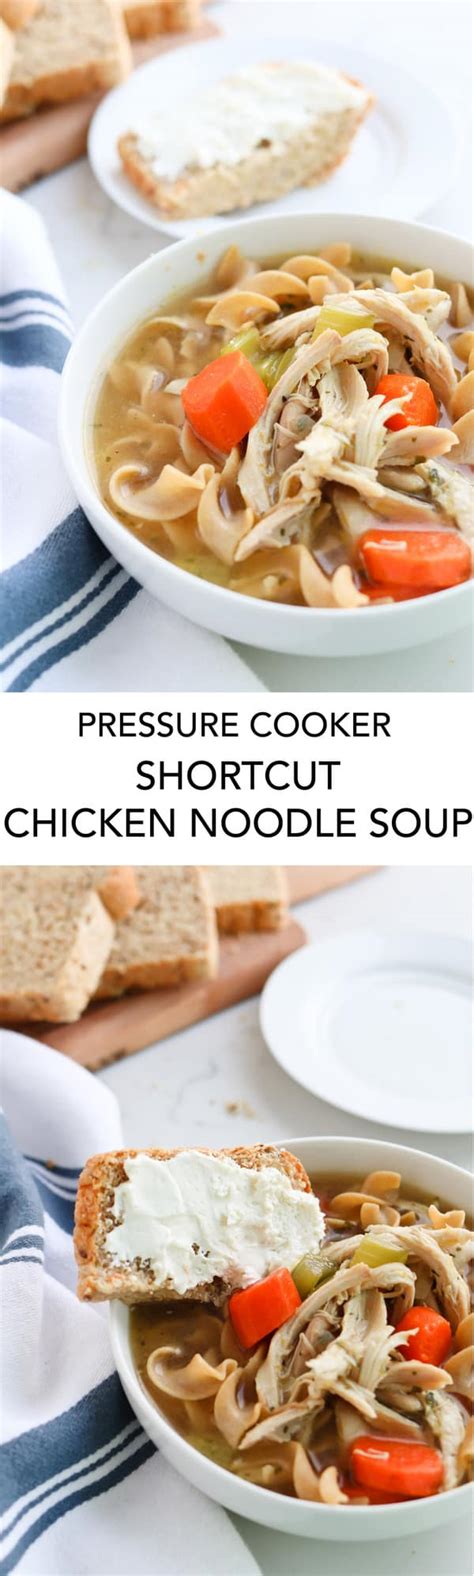 My ultimate version is made using a whole chicken to make a full blown homemade so here are the things i do that i think makes this easy chicken noodle soup extra tasty even though it's a relatively speedy midweek version Chicken Noodle Soup In Power Quickpot / How to Make an ...